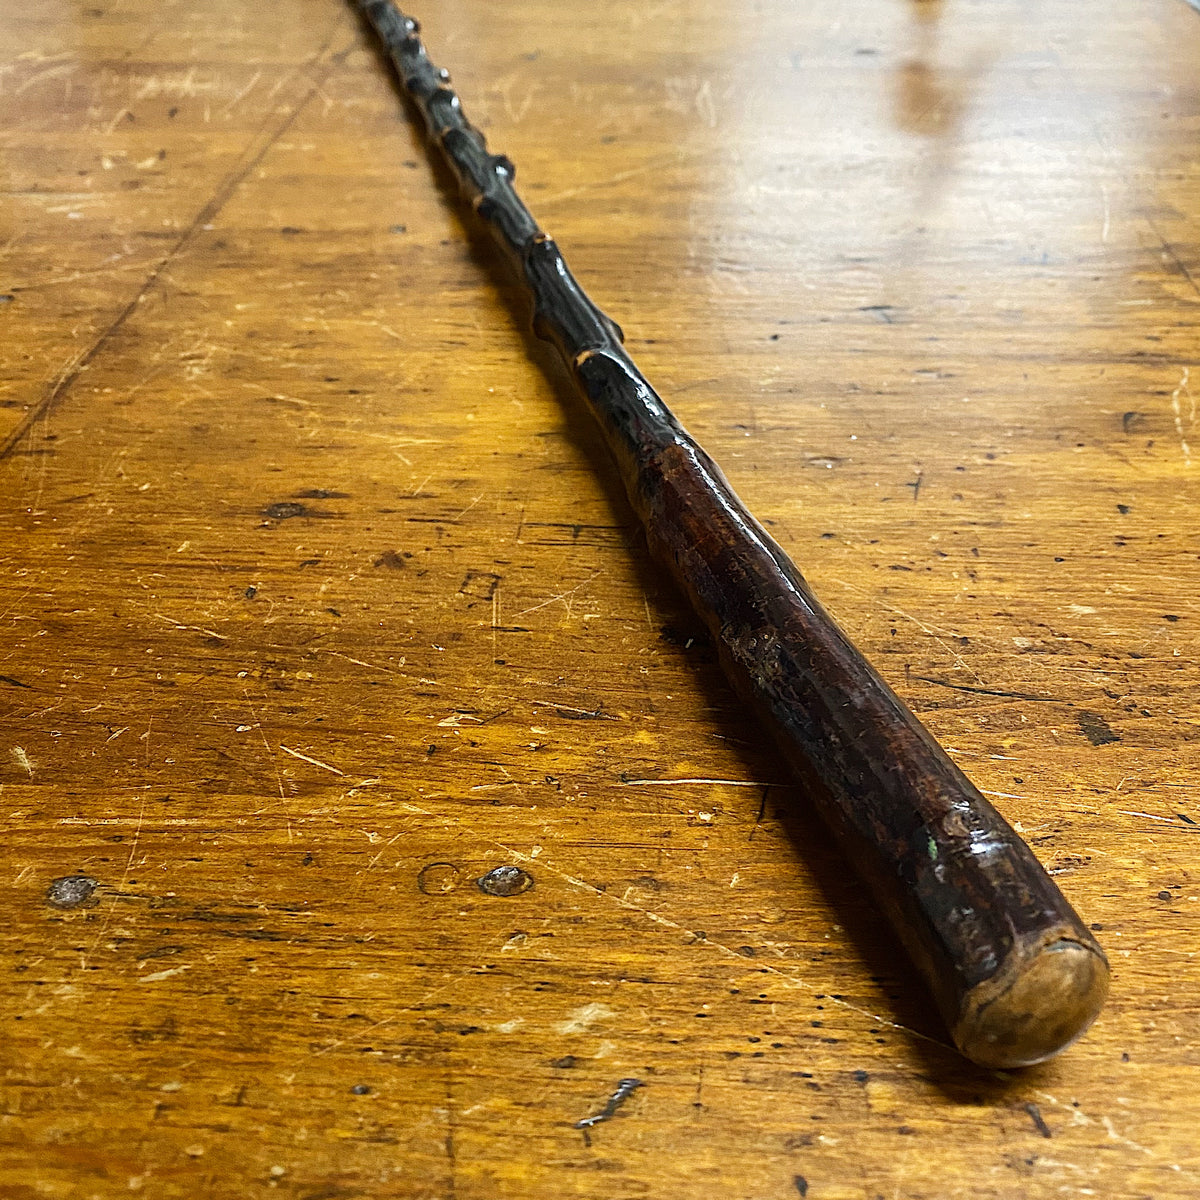 Antique Blackthorn Shillelagh Walking Stick Cane Early 1900s Mad Van Antiques 8279